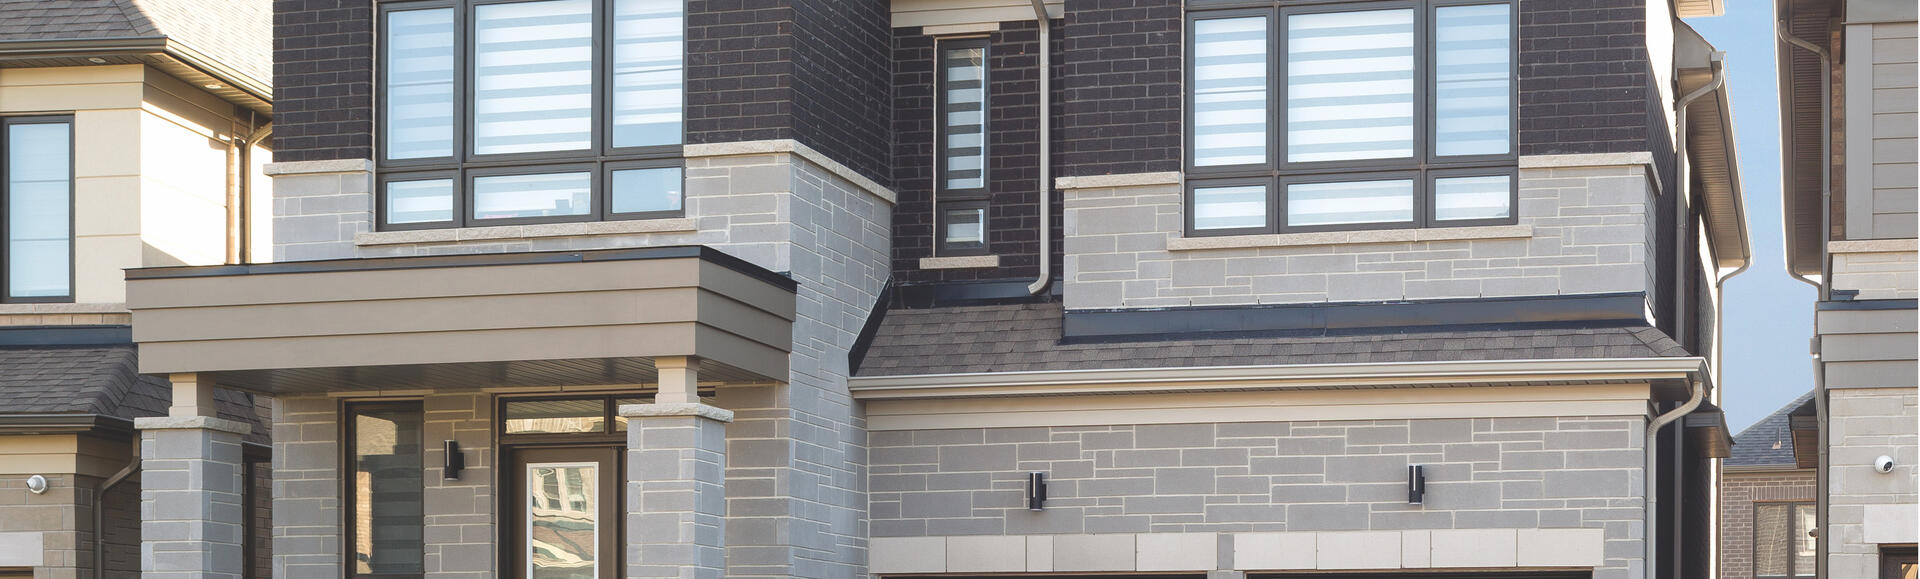 House using Contempo stone and Contemporary clay brick products from Brampton Brick 